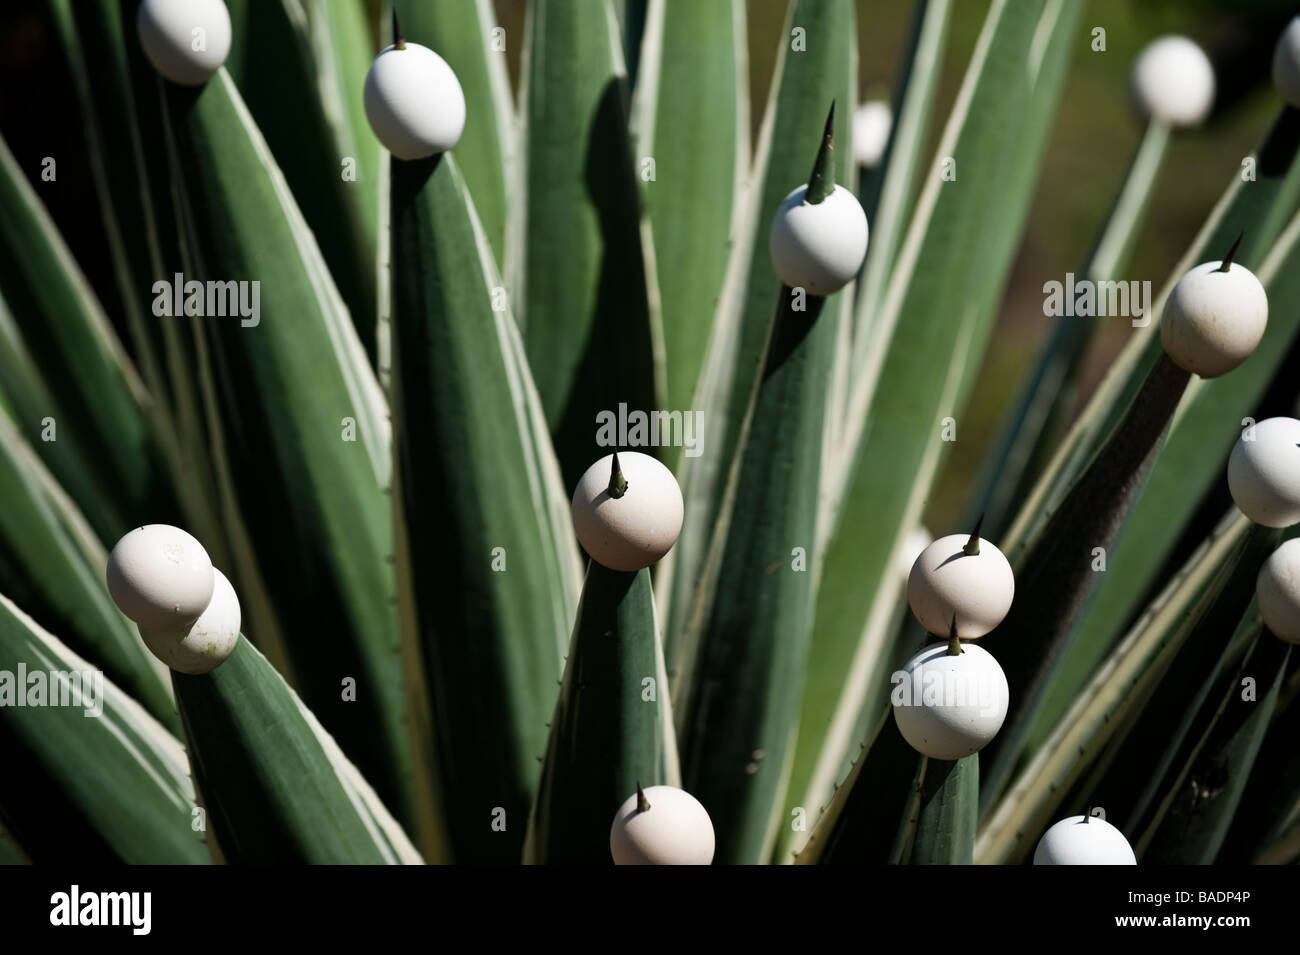 Egg shells used to warn and protect the spikes of a yucca plant in Grenada Stock Photo